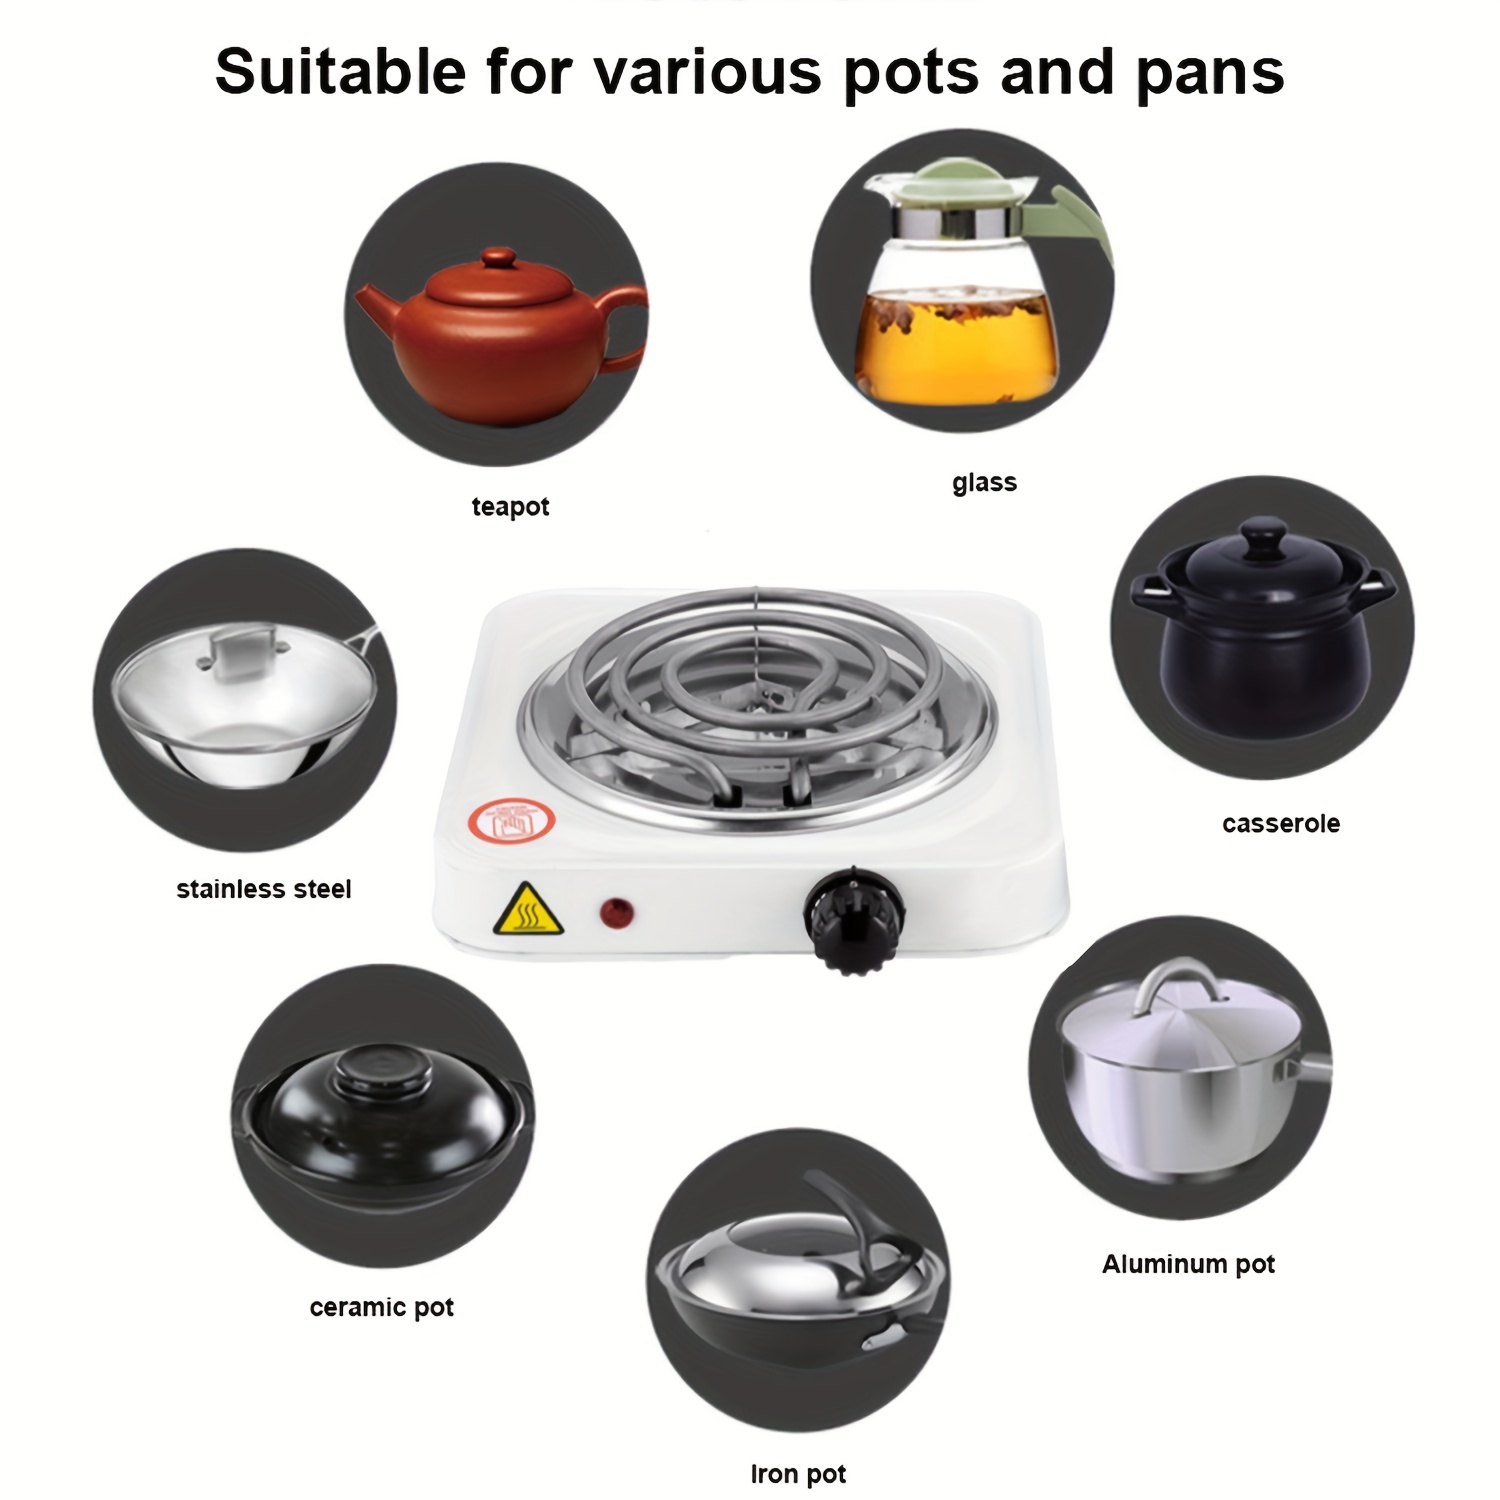 Hot Plate Electric Cooker Single Portable Table Top Kitchen Hob Stove 1000W